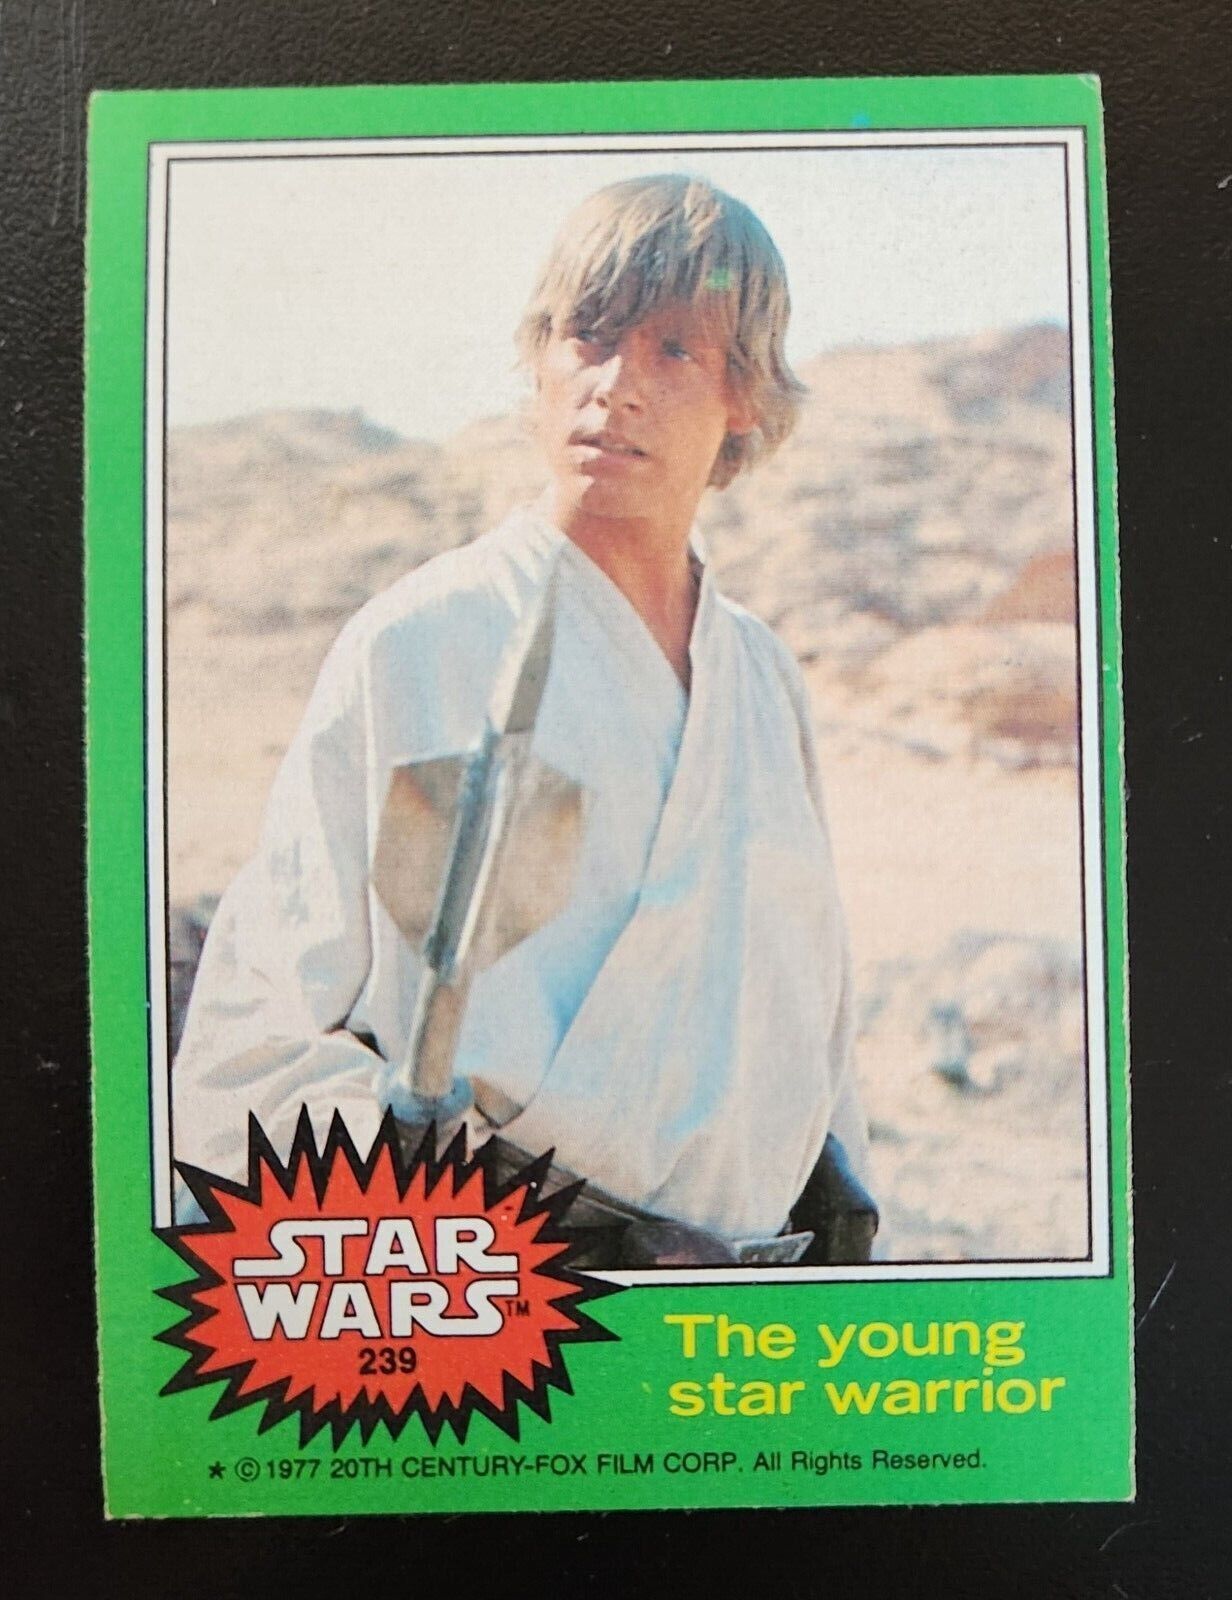 1977 STAR WARS TOPPS Trading Cards Green Series 4 Your Choice 66 Cards U Pick